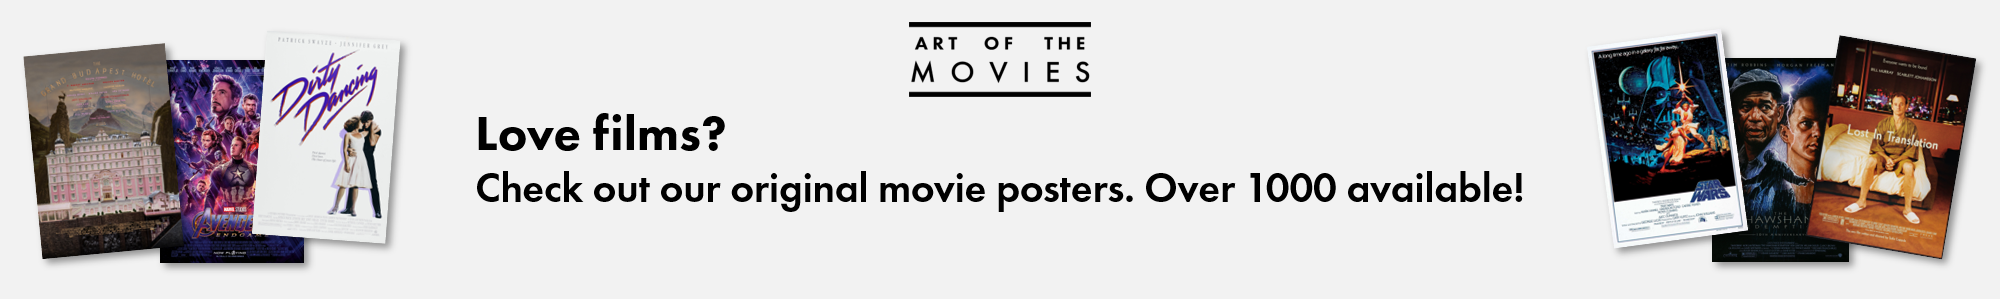 Fantastic original movie posters from Art of the Movies